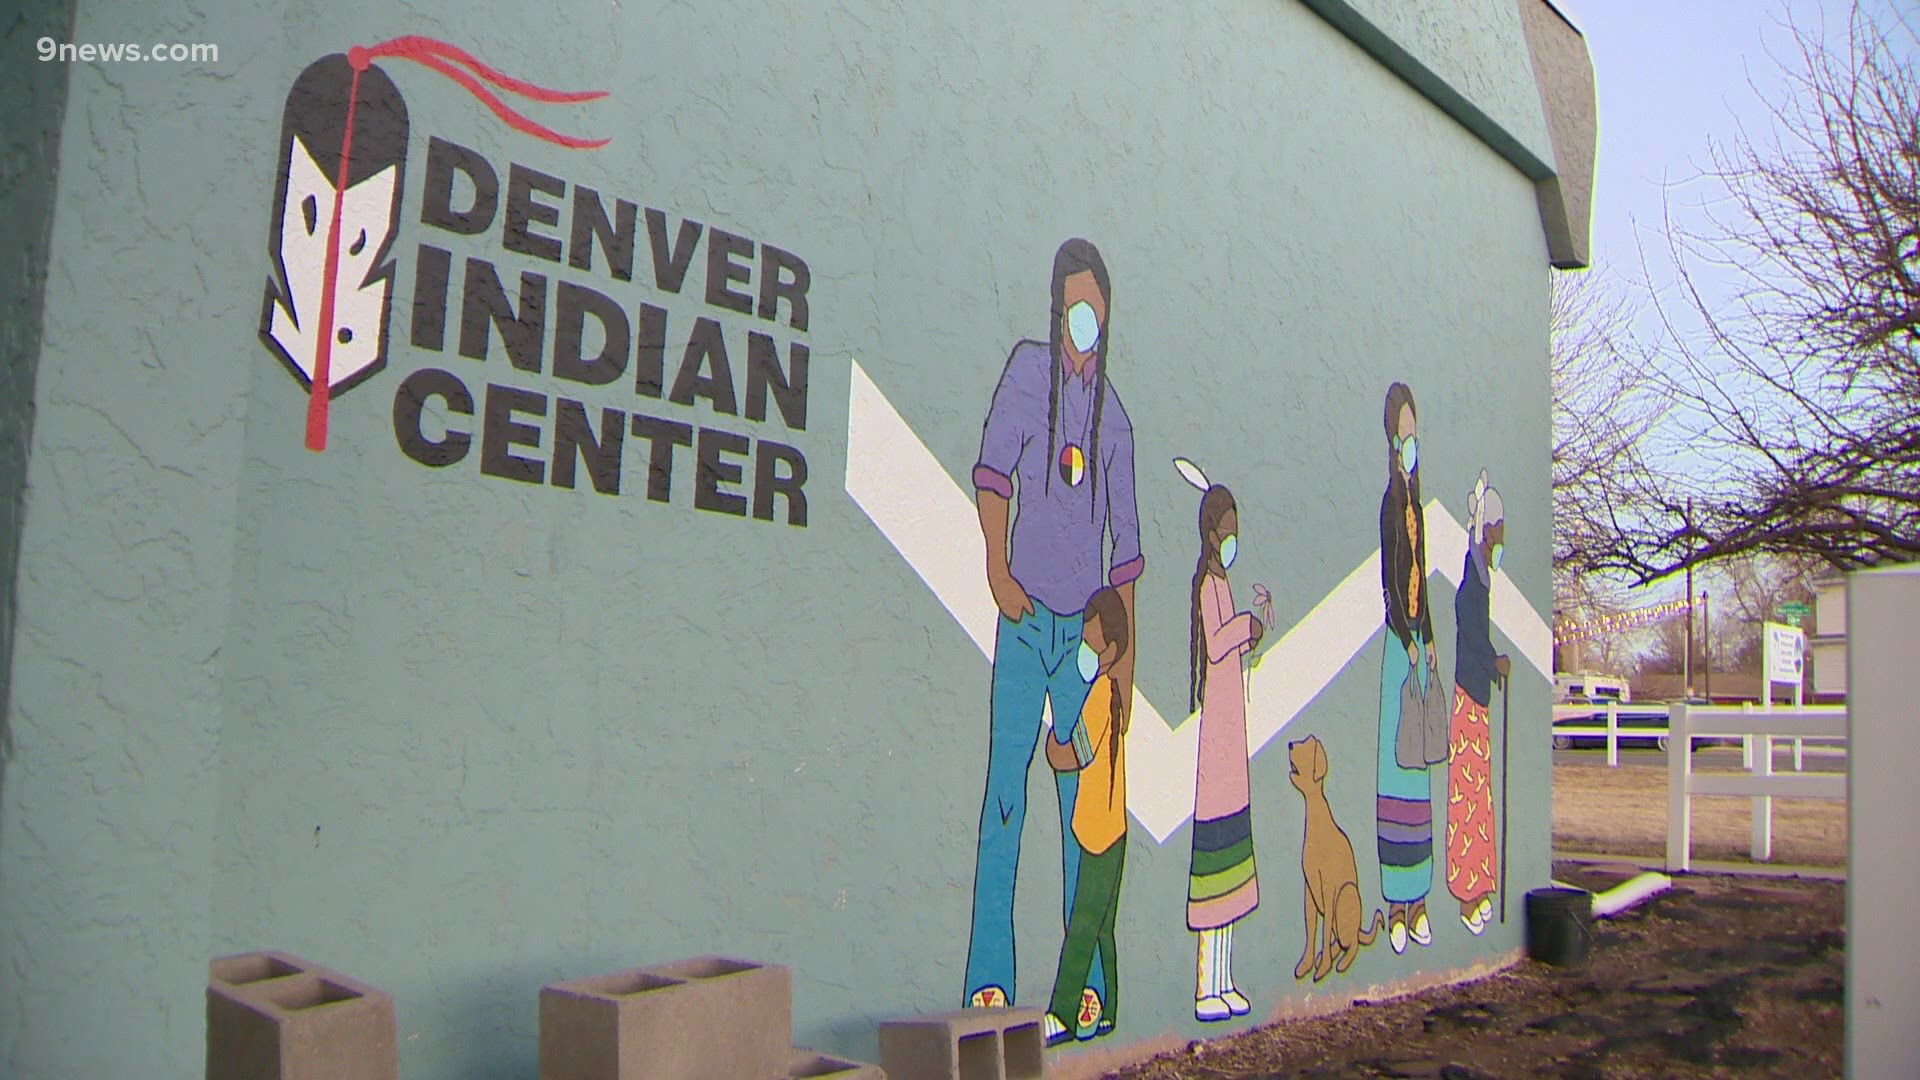 The Denver Indian Center has an 'Honoring Fatherhood' program that's specifically aimed at helping fathers of all ages.